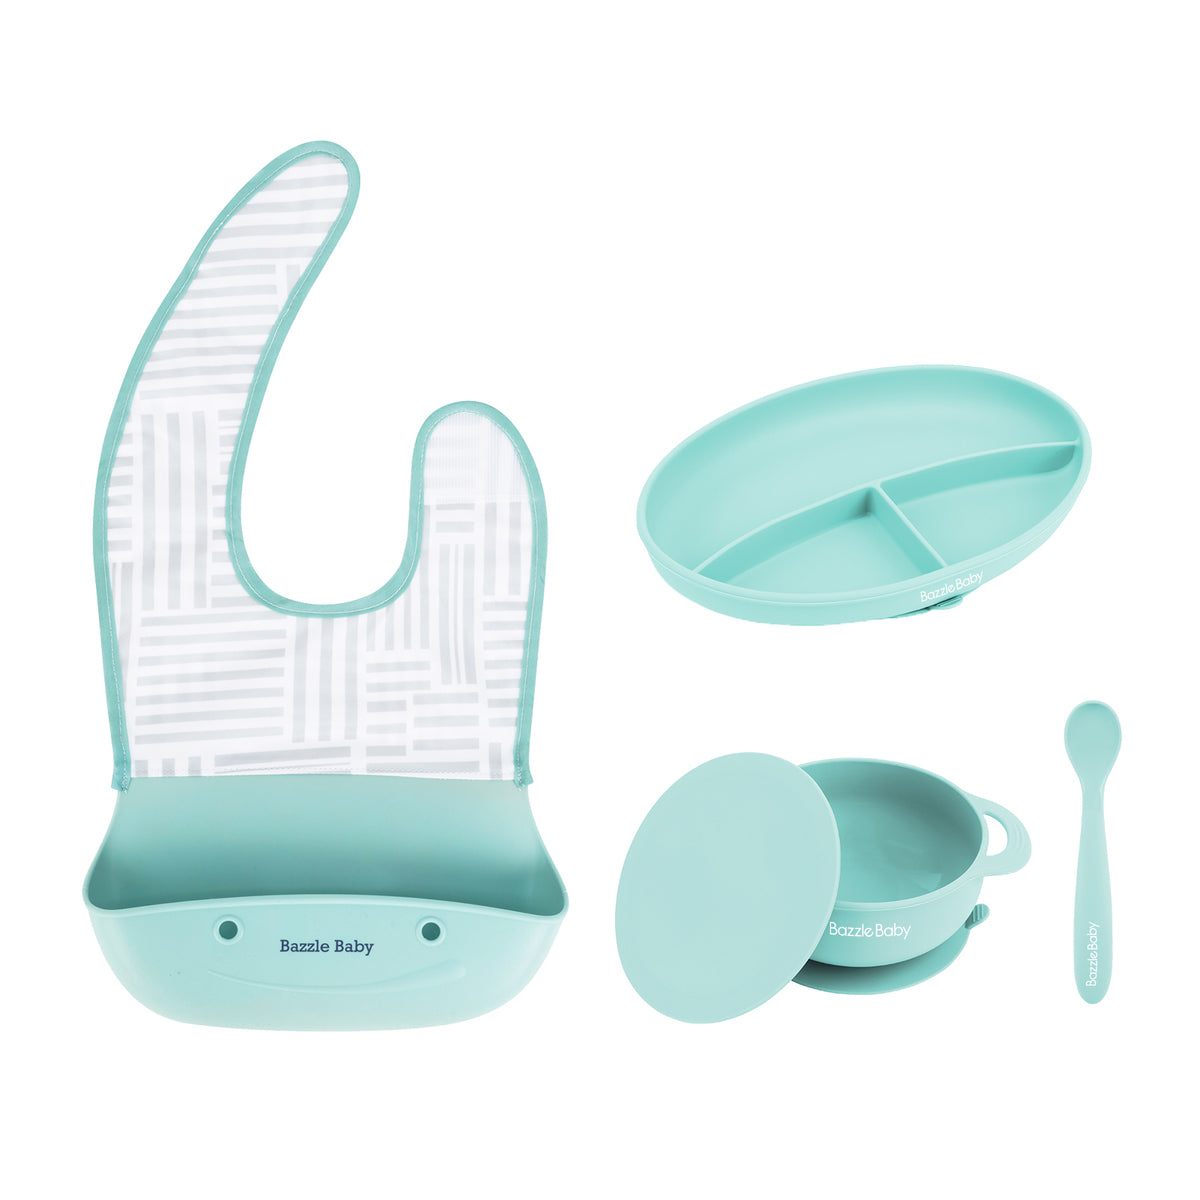 Foodie Silicone Feeding Bibs - Bazzle Baby